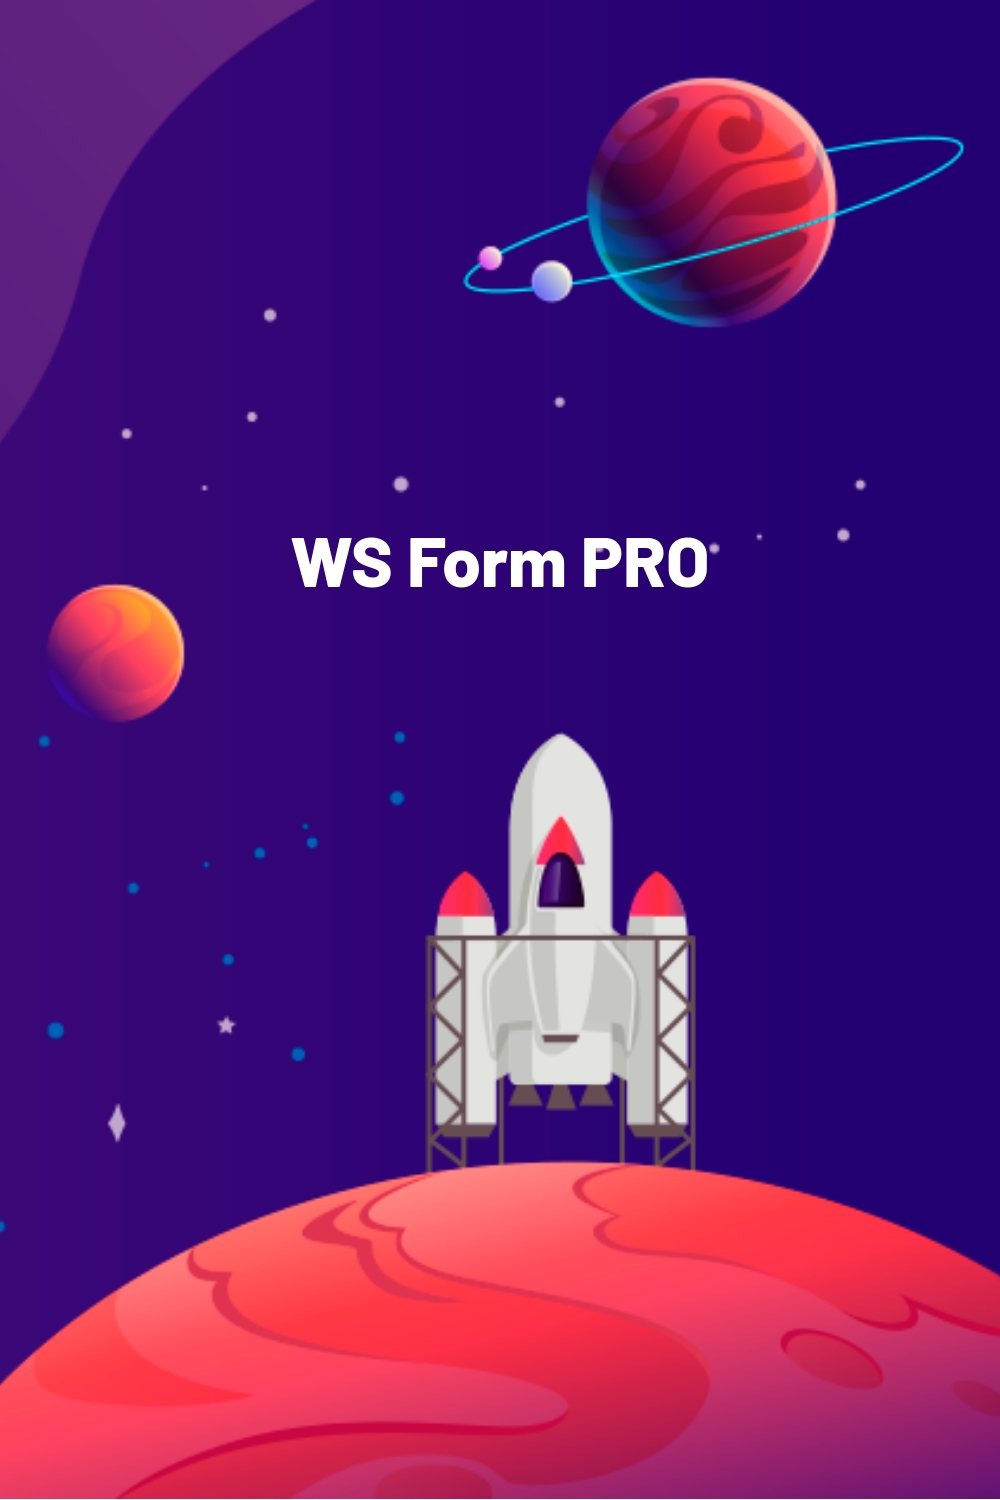 WS Form PRO